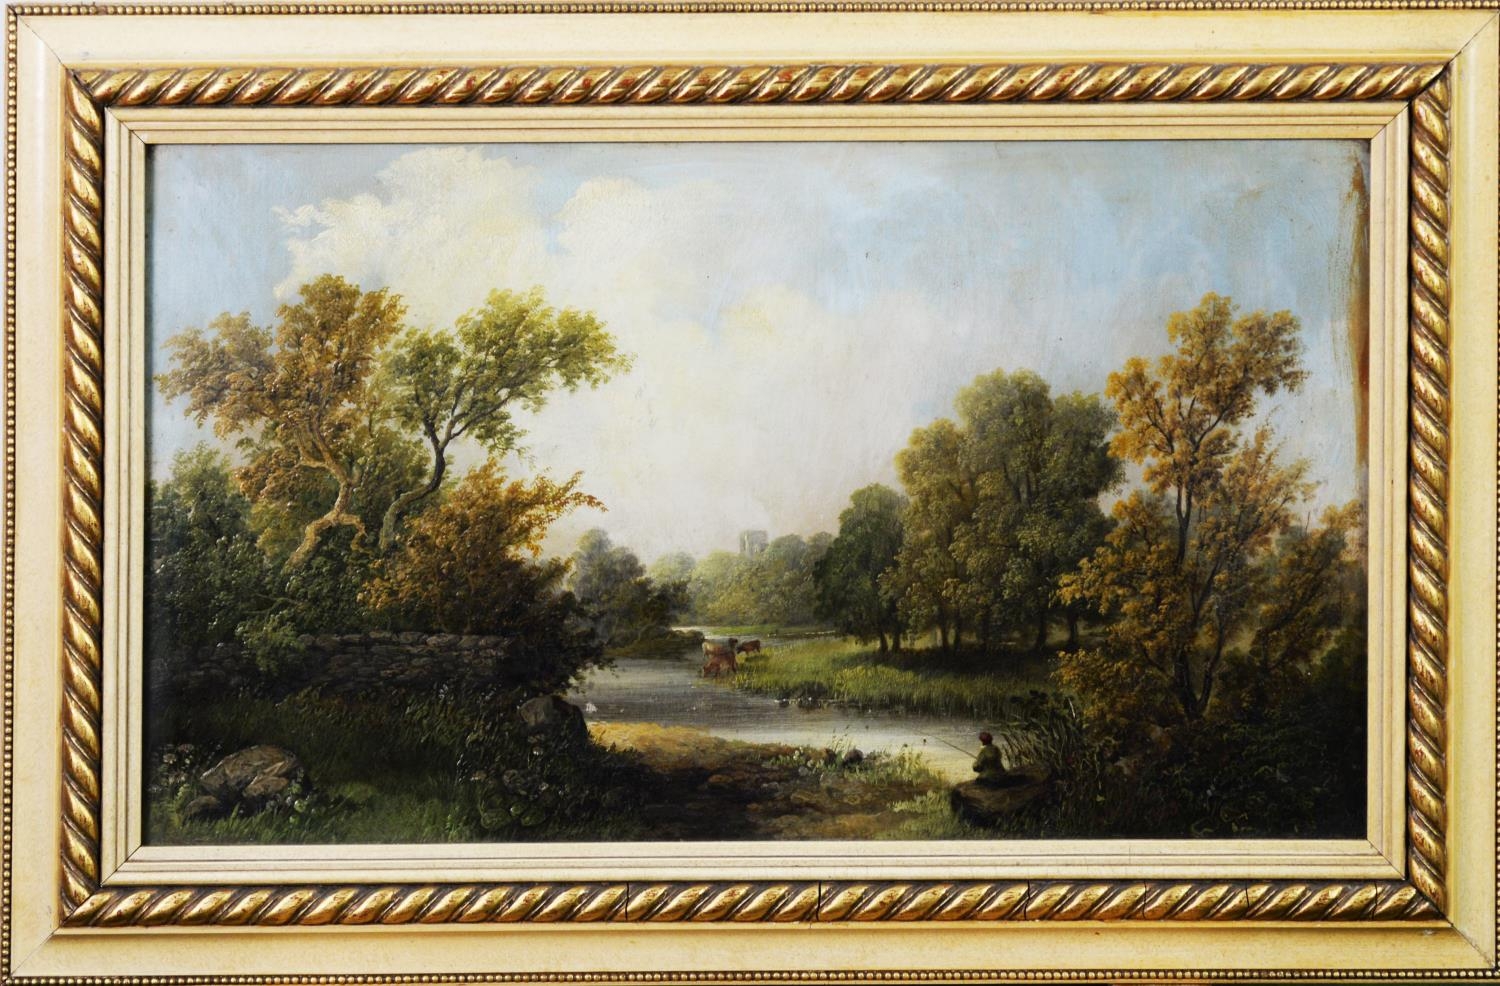 E R BARNES (19th CENTURY) OIL PAINTING ON BOARD River landscape with fisherman and cattle watering - Image 2 of 2